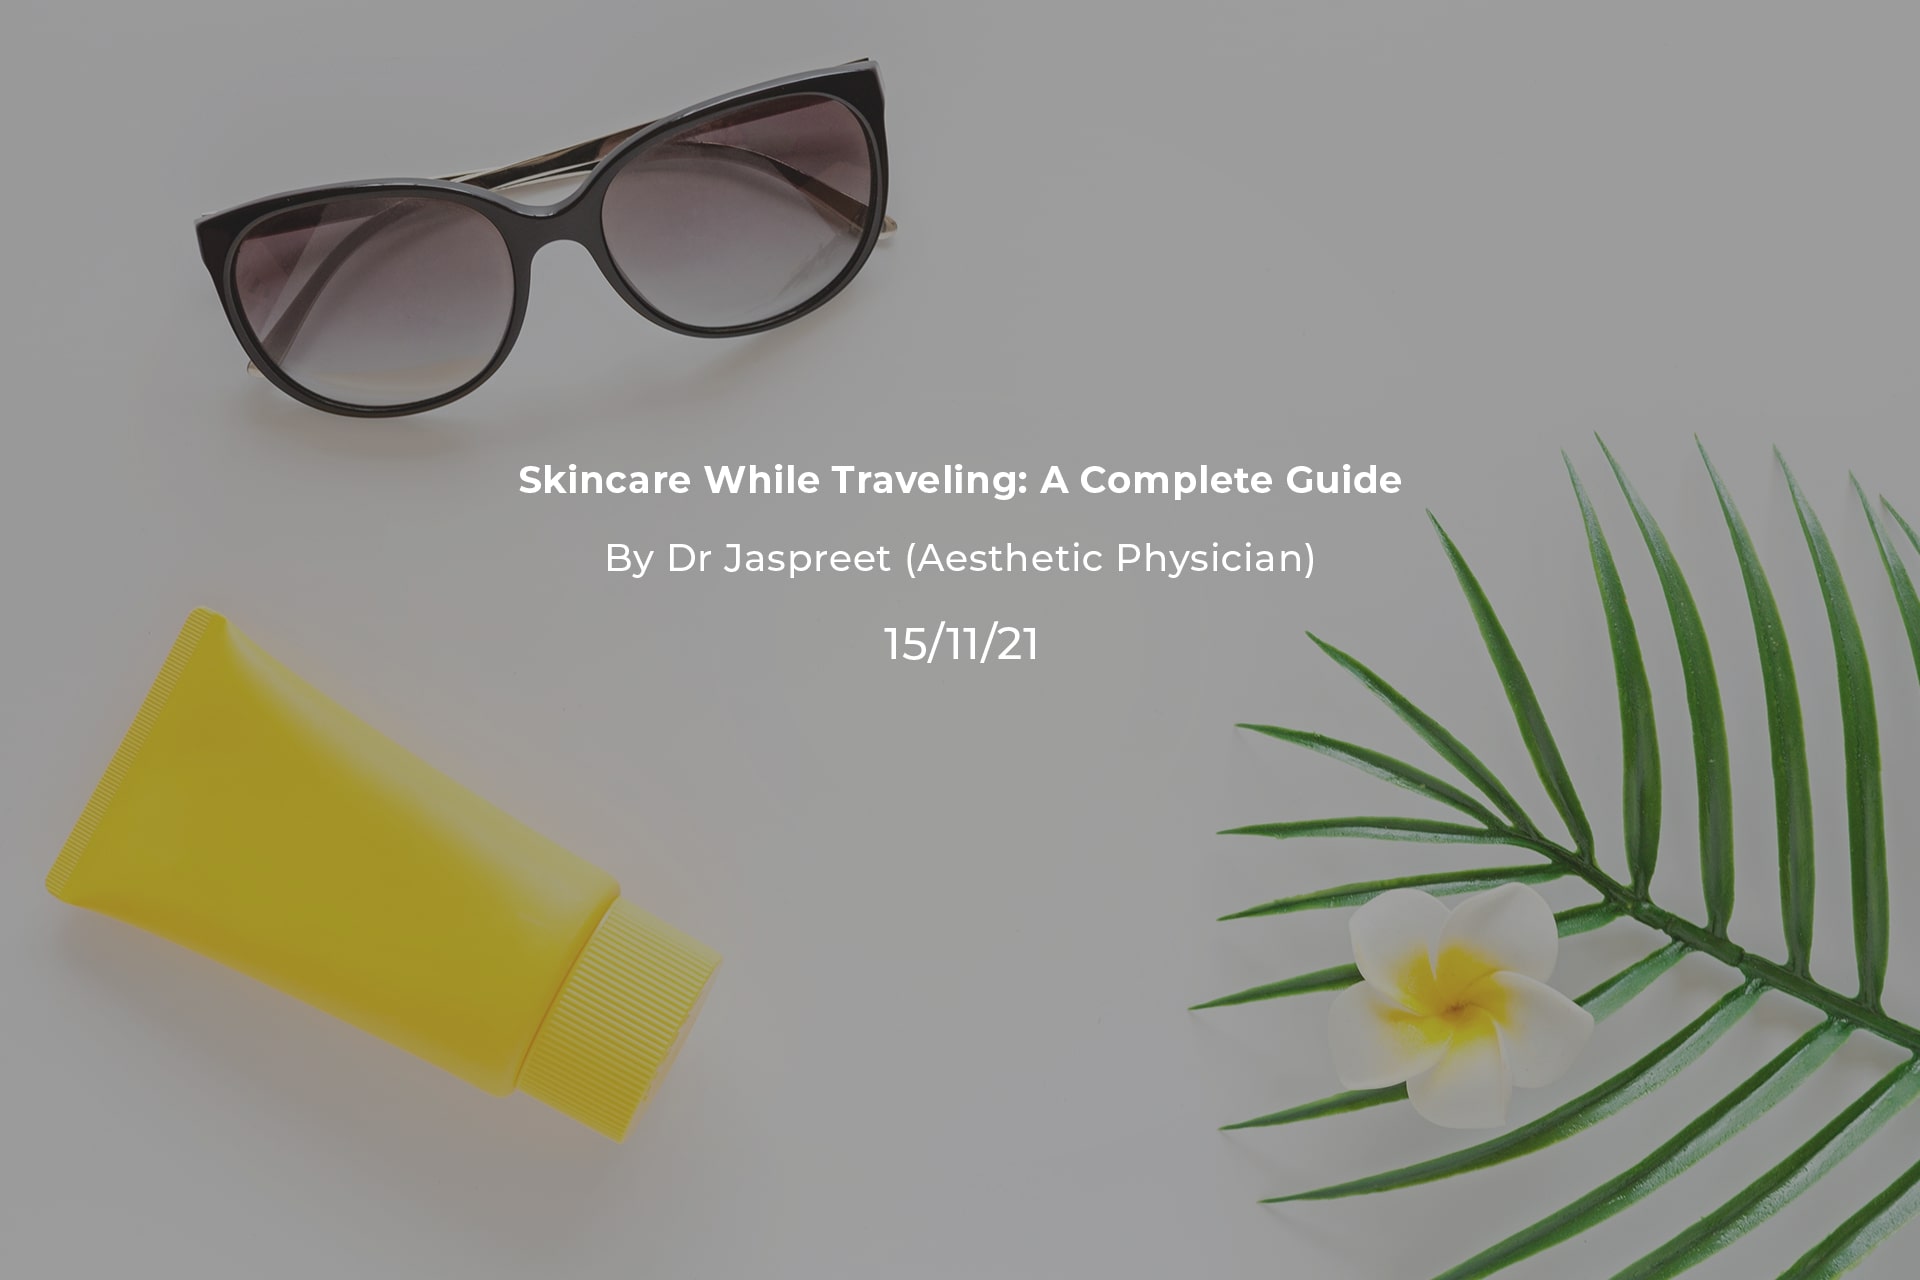 Skincare While Traveling- A Complete Guide